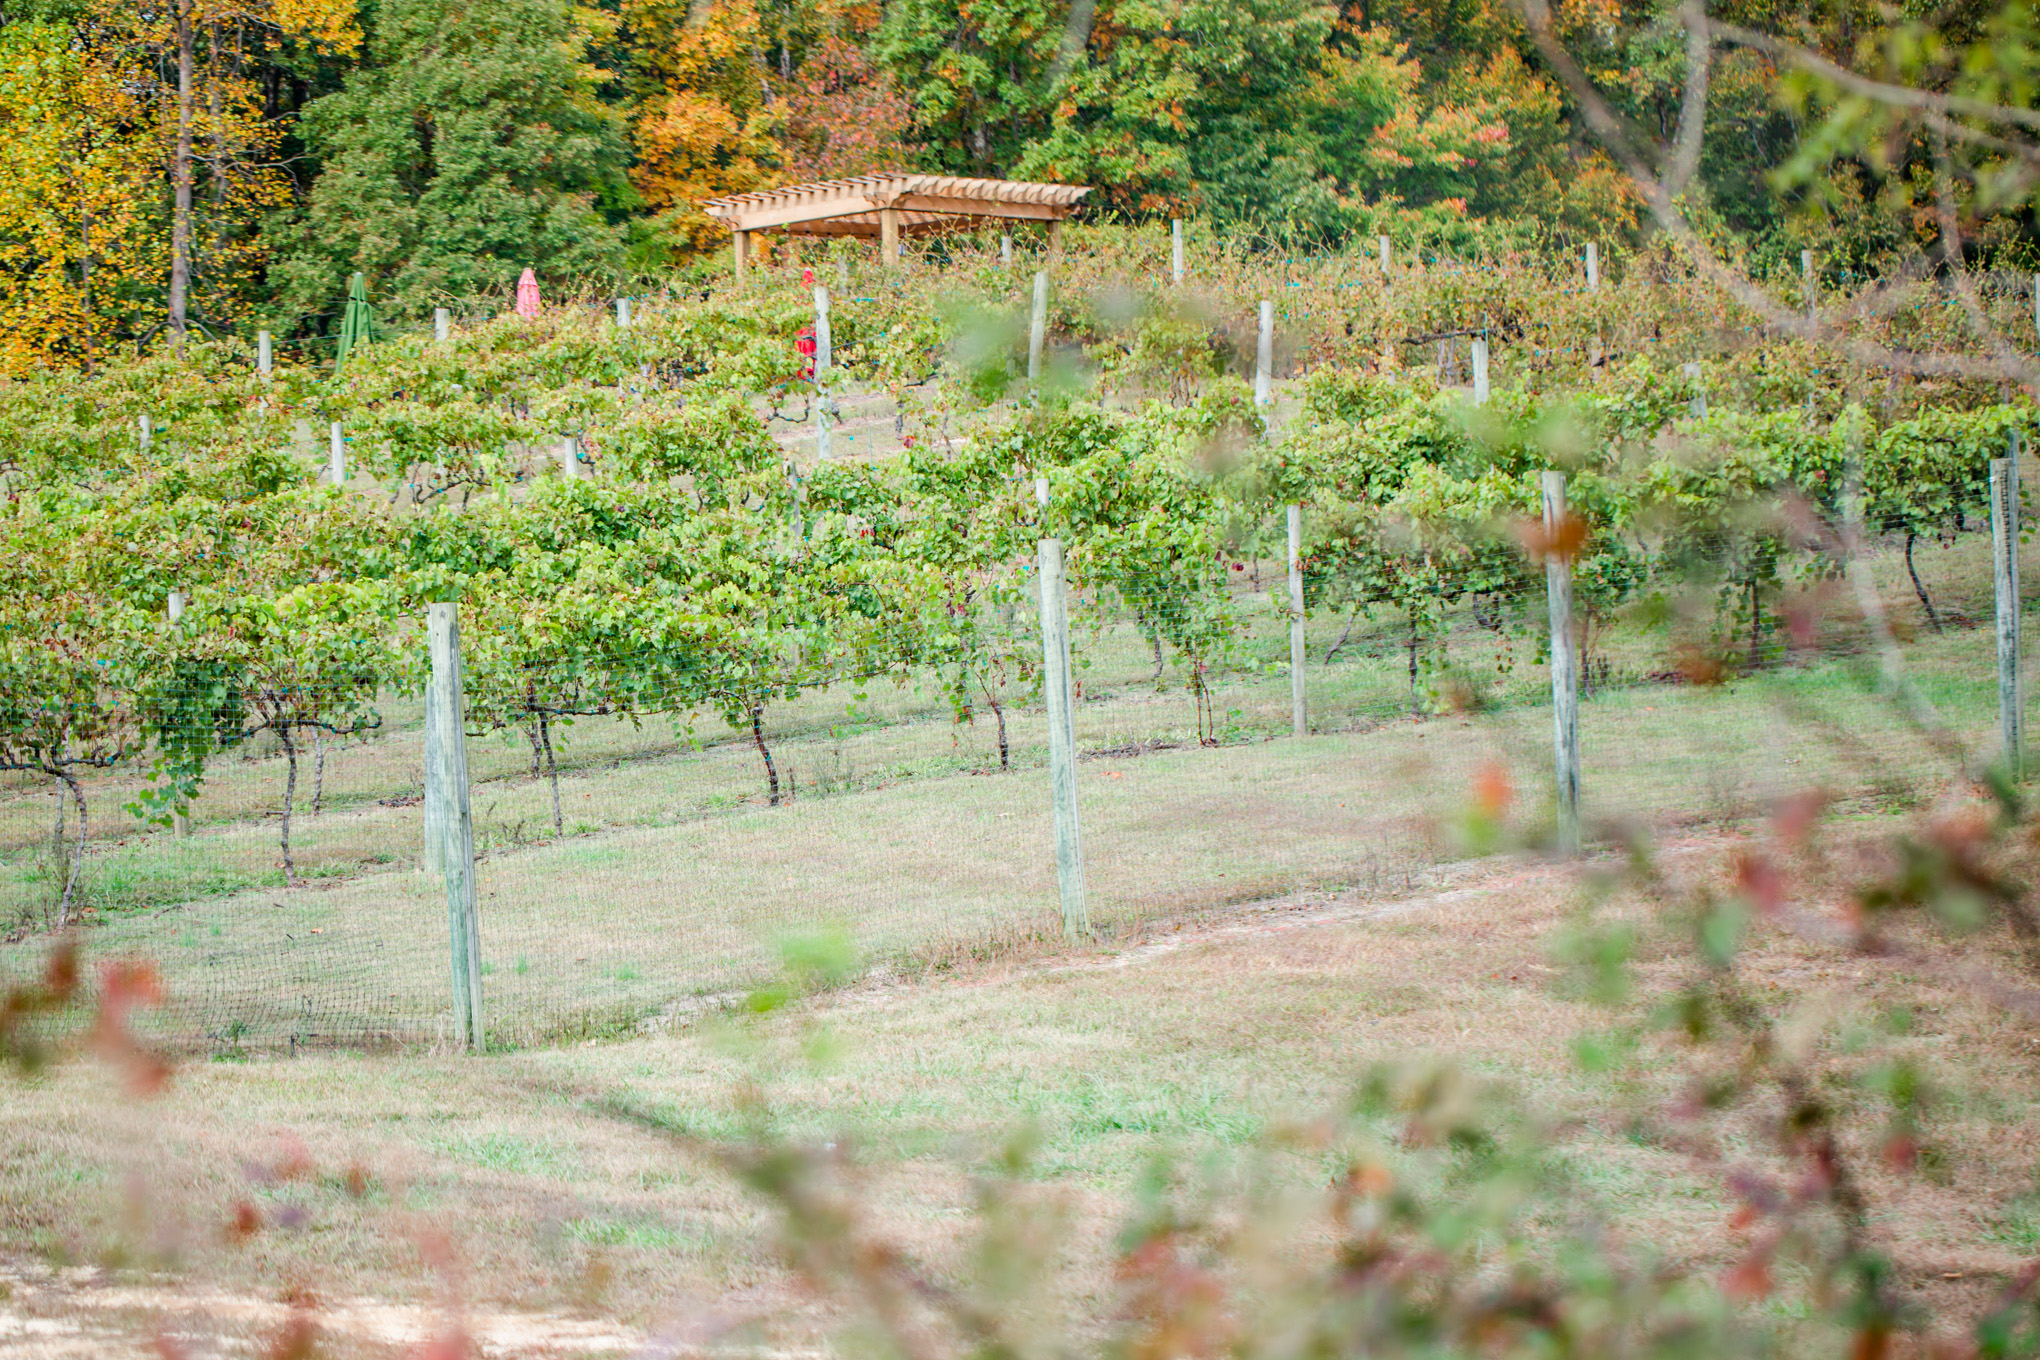 Running Hare Vineyard surprise proposal, Maryland winery, Maryland proposal photographer, D.C. proposal photographer, Maryland engagement, surprise proposal, Running Hare Vineyard proposal, Running Hare Vineyard, D.C. wedding photographer, Rachel E.H. Photography, autumn proposal, autumn surprise proposal